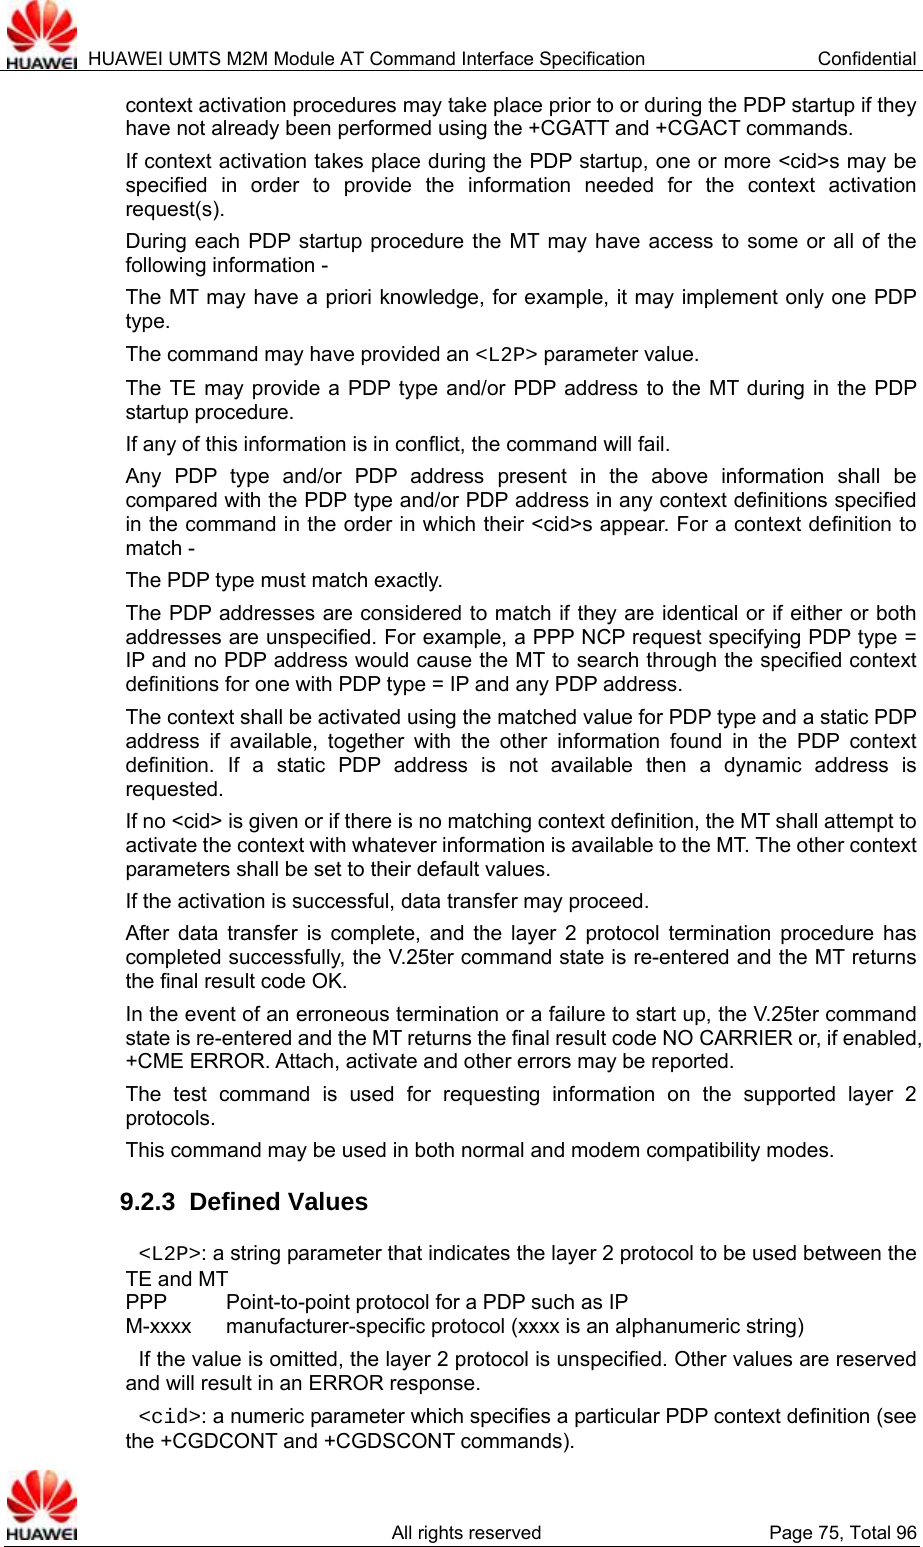  HUAWEI UMTS M2M Module AT Command Interface Specification  Confidential   All rights reserved  Page 75, Total 96 context activation procedures may take place prior to or during the PDP startup if they have not already been performed using the +CGATT and +CGACT commands.   If context activation takes place during the PDP startup, one or more &lt;cid&gt;s may be specified in order to provide the information needed for the context activation request(s). During each PDP startup procedure the MT may have access to some or all of the following information - The MT may have a priori knowledge, for example, it may implement only one PDP type. The command may have provided an &lt;L2P&gt; parameter value. The TE may provide a PDP type and/or PDP address to the MT during in the PDP startup procedure. If any of this information is in conflict, the command will fail. Any PDP type and/or PDP address present in the above information shall be compared with the PDP type and/or PDP address in any context definitions specified in the command in the order in which their &lt;cid&gt;s appear. For a context definition to match - The PDP type must match exactly. The PDP addresses are considered to match if they are identical or if either or both addresses are unspecified. For example, a PPP NCP request specifying PDP type = IP and no PDP address would cause the MT to search through the specified context definitions for one with PDP type = IP and any PDP address. The context shall be activated using the matched value for PDP type and a static PDP address if available, together with the other information found in the PDP context definition. If a static PDP address is not available then a dynamic address is requested. If no &lt;cid&gt; is given or if there is no matching context definition, the MT shall attempt to activate the context with whatever information is available to the MT. The other context parameters shall be set to their default values. If the activation is successful, data transfer may proceed. After data transfer is complete, and the layer 2 protocol termination procedure has completed successfully, the V.25ter command state is re-entered and the MT returns the final result code OK. In the event of an erroneous termination or a failure to start up, the V.25ter command state is re-entered and the MT returns the final result code NO CARRIER or, if enabled, +CME ERROR. Attach, activate and other errors may be reported. The test command is used for requesting information on the supported layer 2 protocols. This command may be used in both normal and modem compatibility modes. 9.2.3  Defined Values  &lt;L2P&gt;: a string parameter that indicates the layer 2 protocol to be used between the TE and MT PPP    Point-to-point protocol for a PDP such as IP M-xxxx manufacturer-specific protocol (xxxx is an alphanumeric string)   If the value is omitted, the layer 2 protocol is unspecified. Other values are reserved and will result in an ERROR response.  &lt;cid&gt;: a numeric parameter which specifies a particular PDP context definition (see the +CGDCONT and +CGDSCONT commands). 